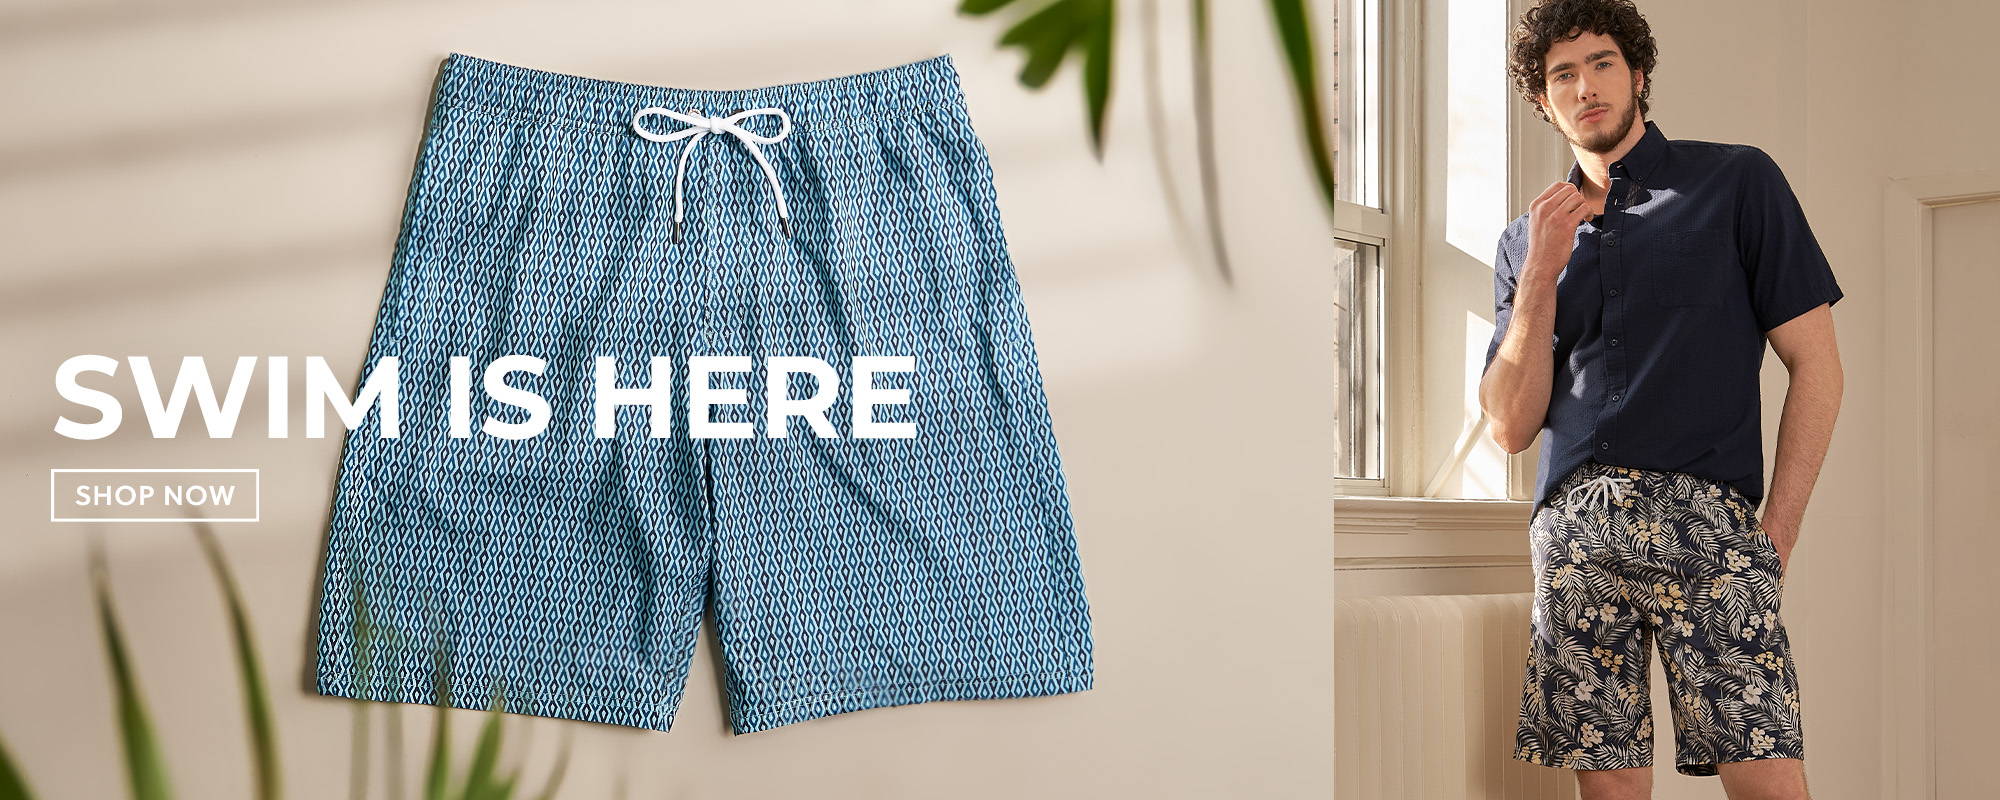 Swim is Here. Shop swim and shorts designed exclusively for tall men. 